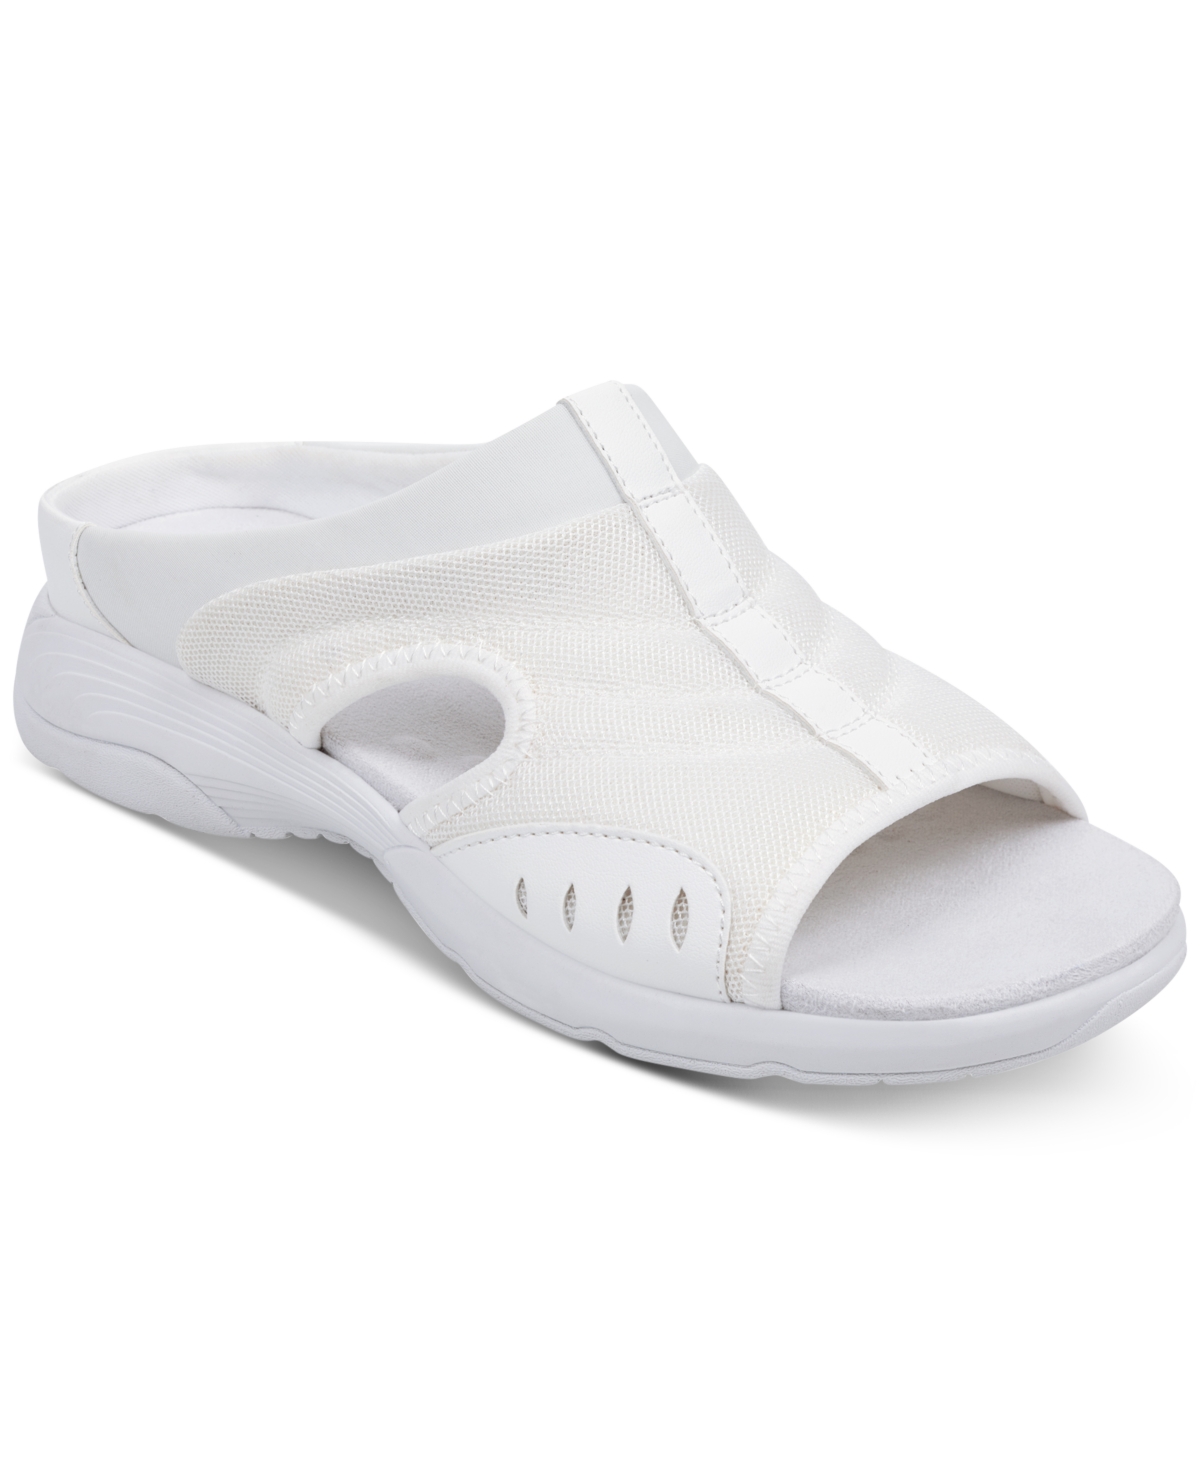 UPC 192733303913 product image for Easy Spirit Women's Traciee Square Toe Casual Flat Sandals Women's Shoes | upcitemdb.com